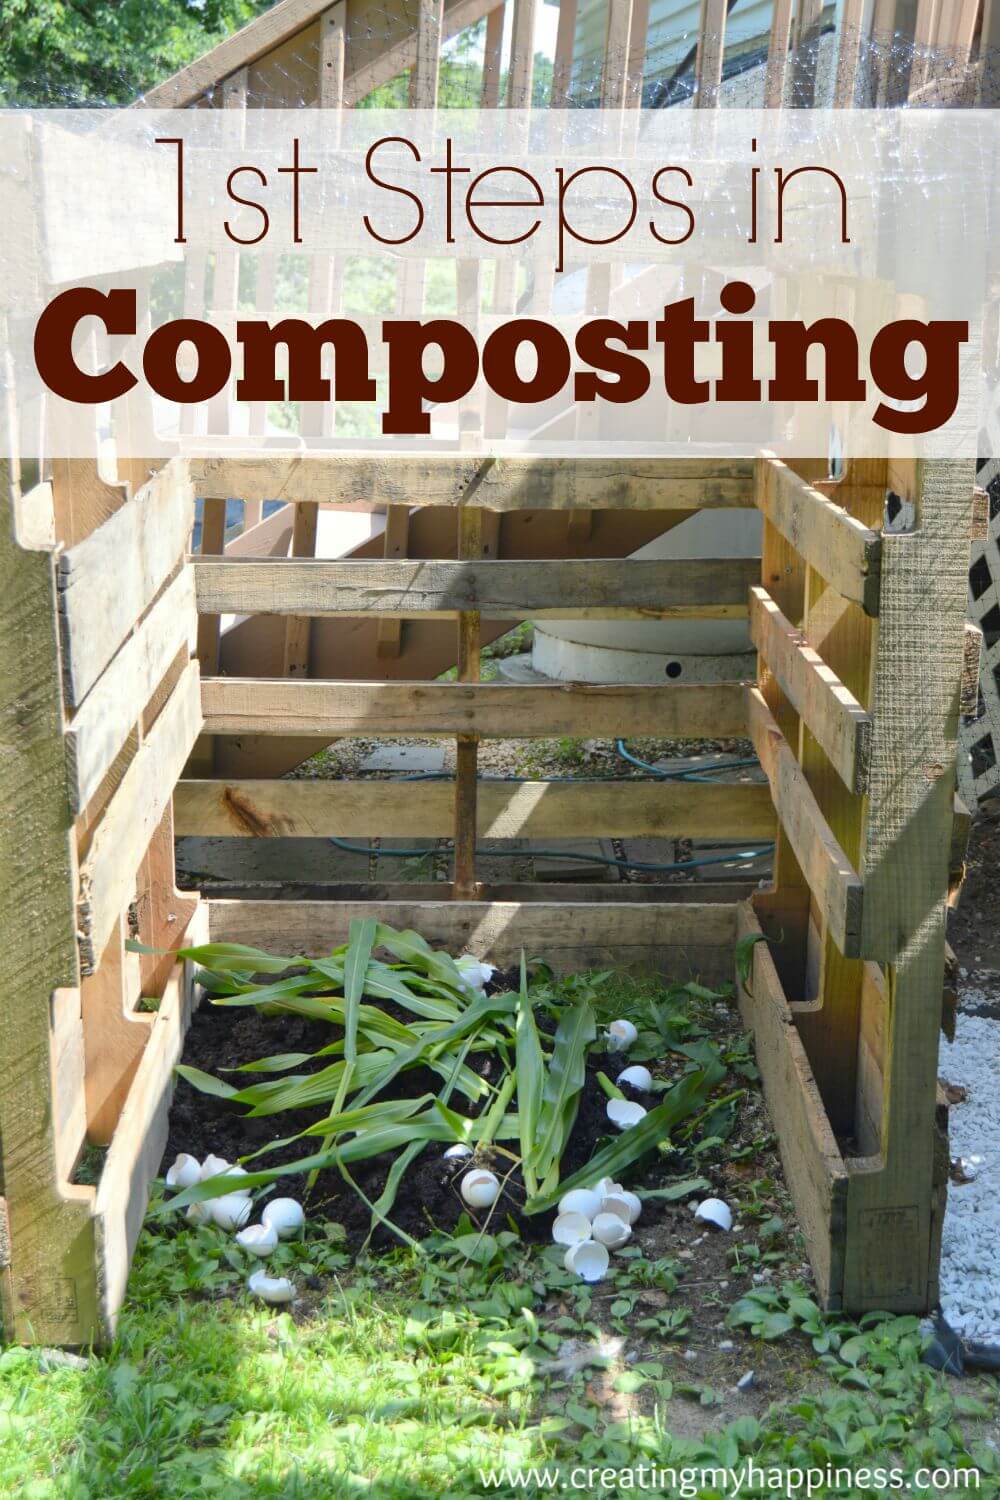 Composting is a great way to save money and take care of the earth. Here are the simple first steps you need to take to get started.